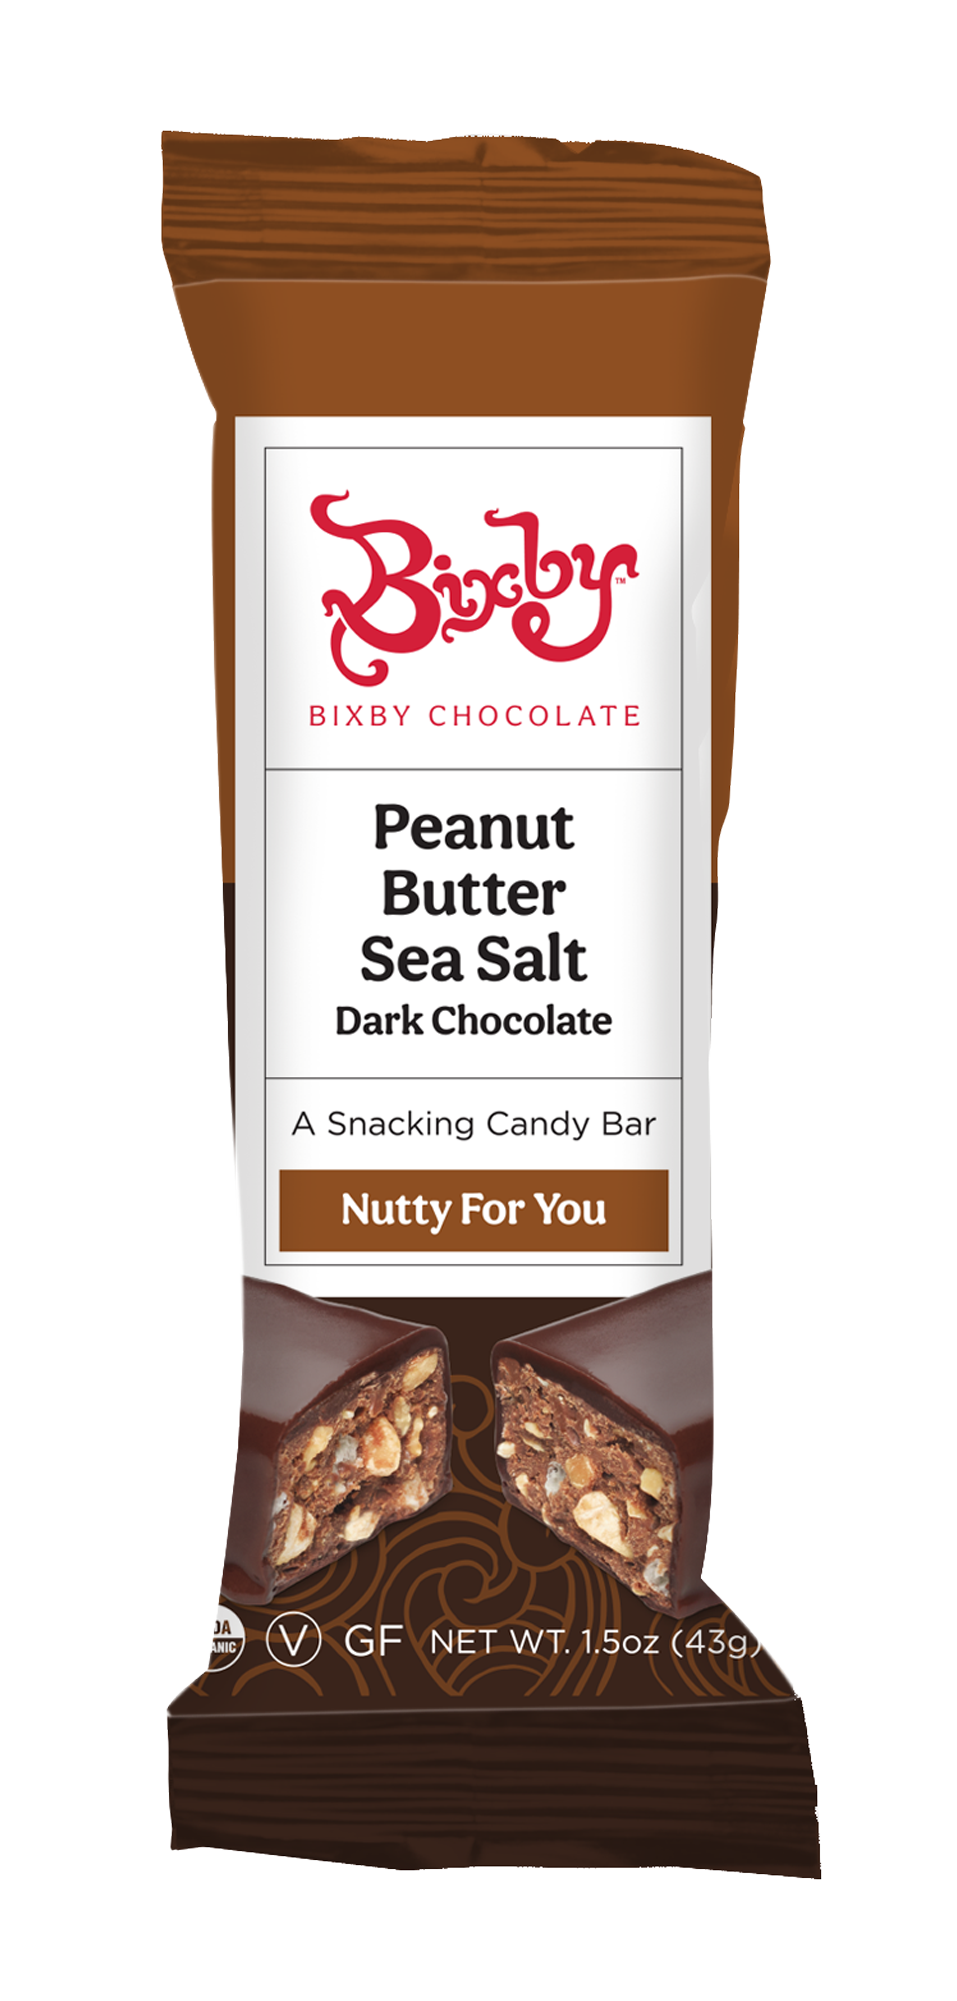 Nutty for You® - Dark Chocolate + Crunchy Peanut Butter + Maine